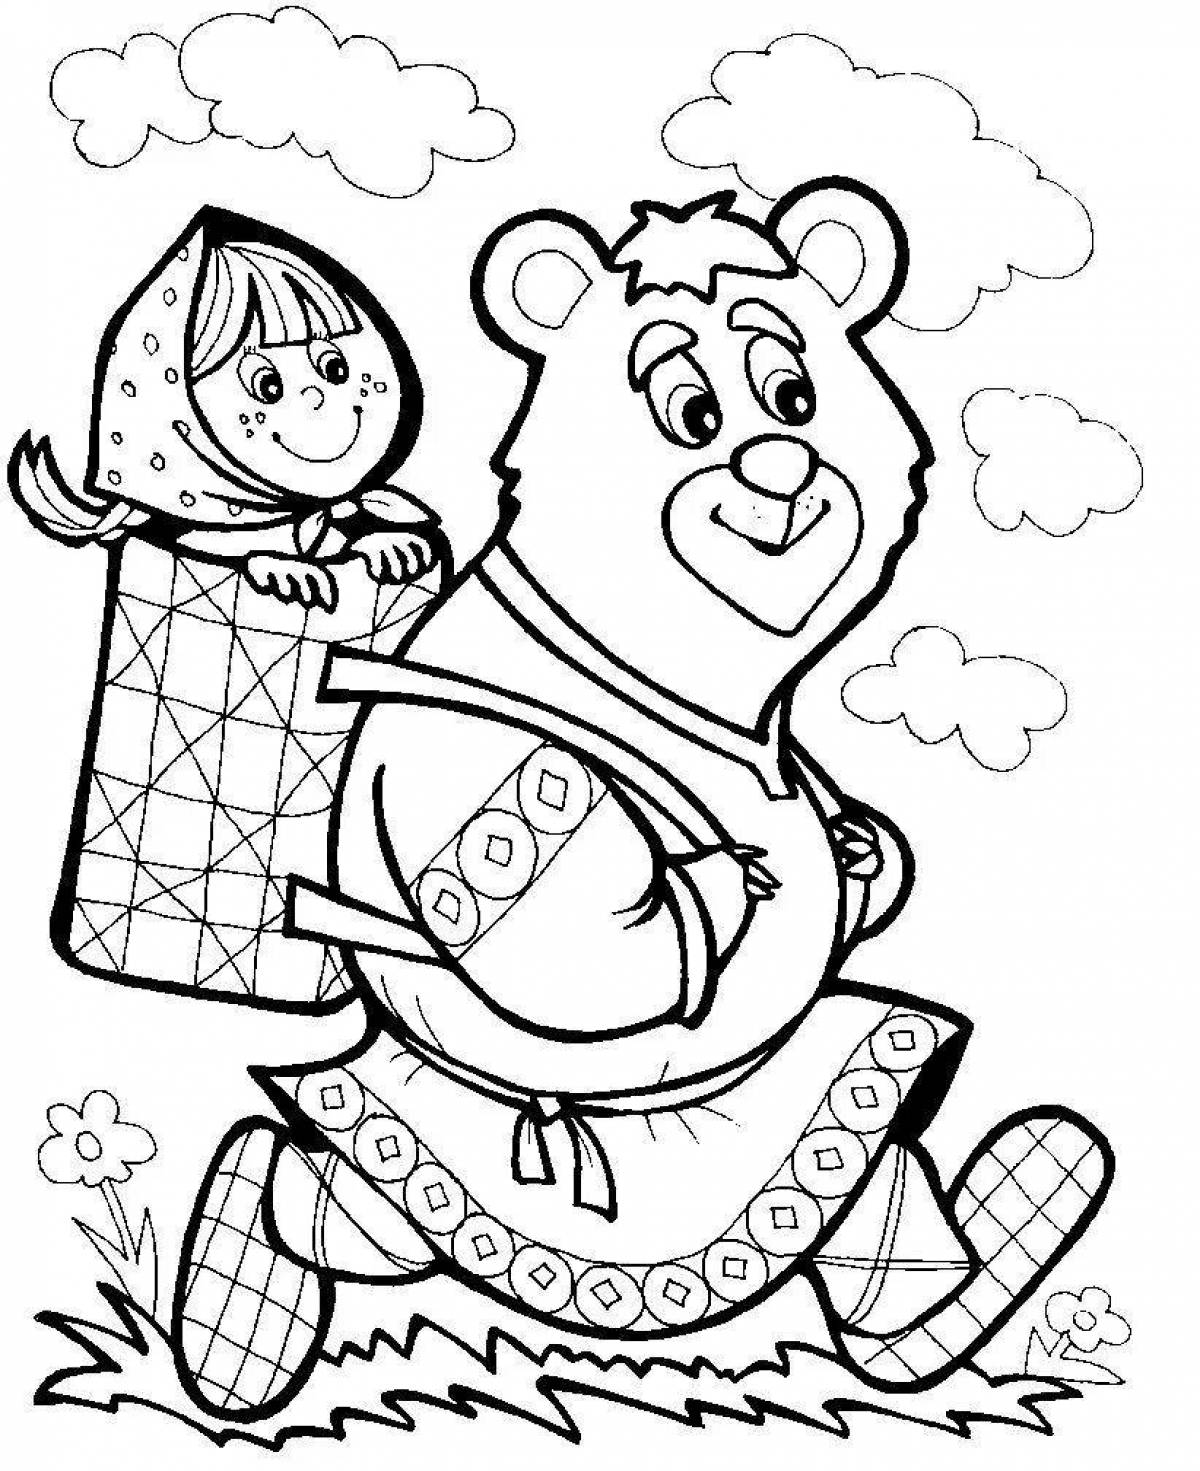 Great fairy tale character coloring book for kids